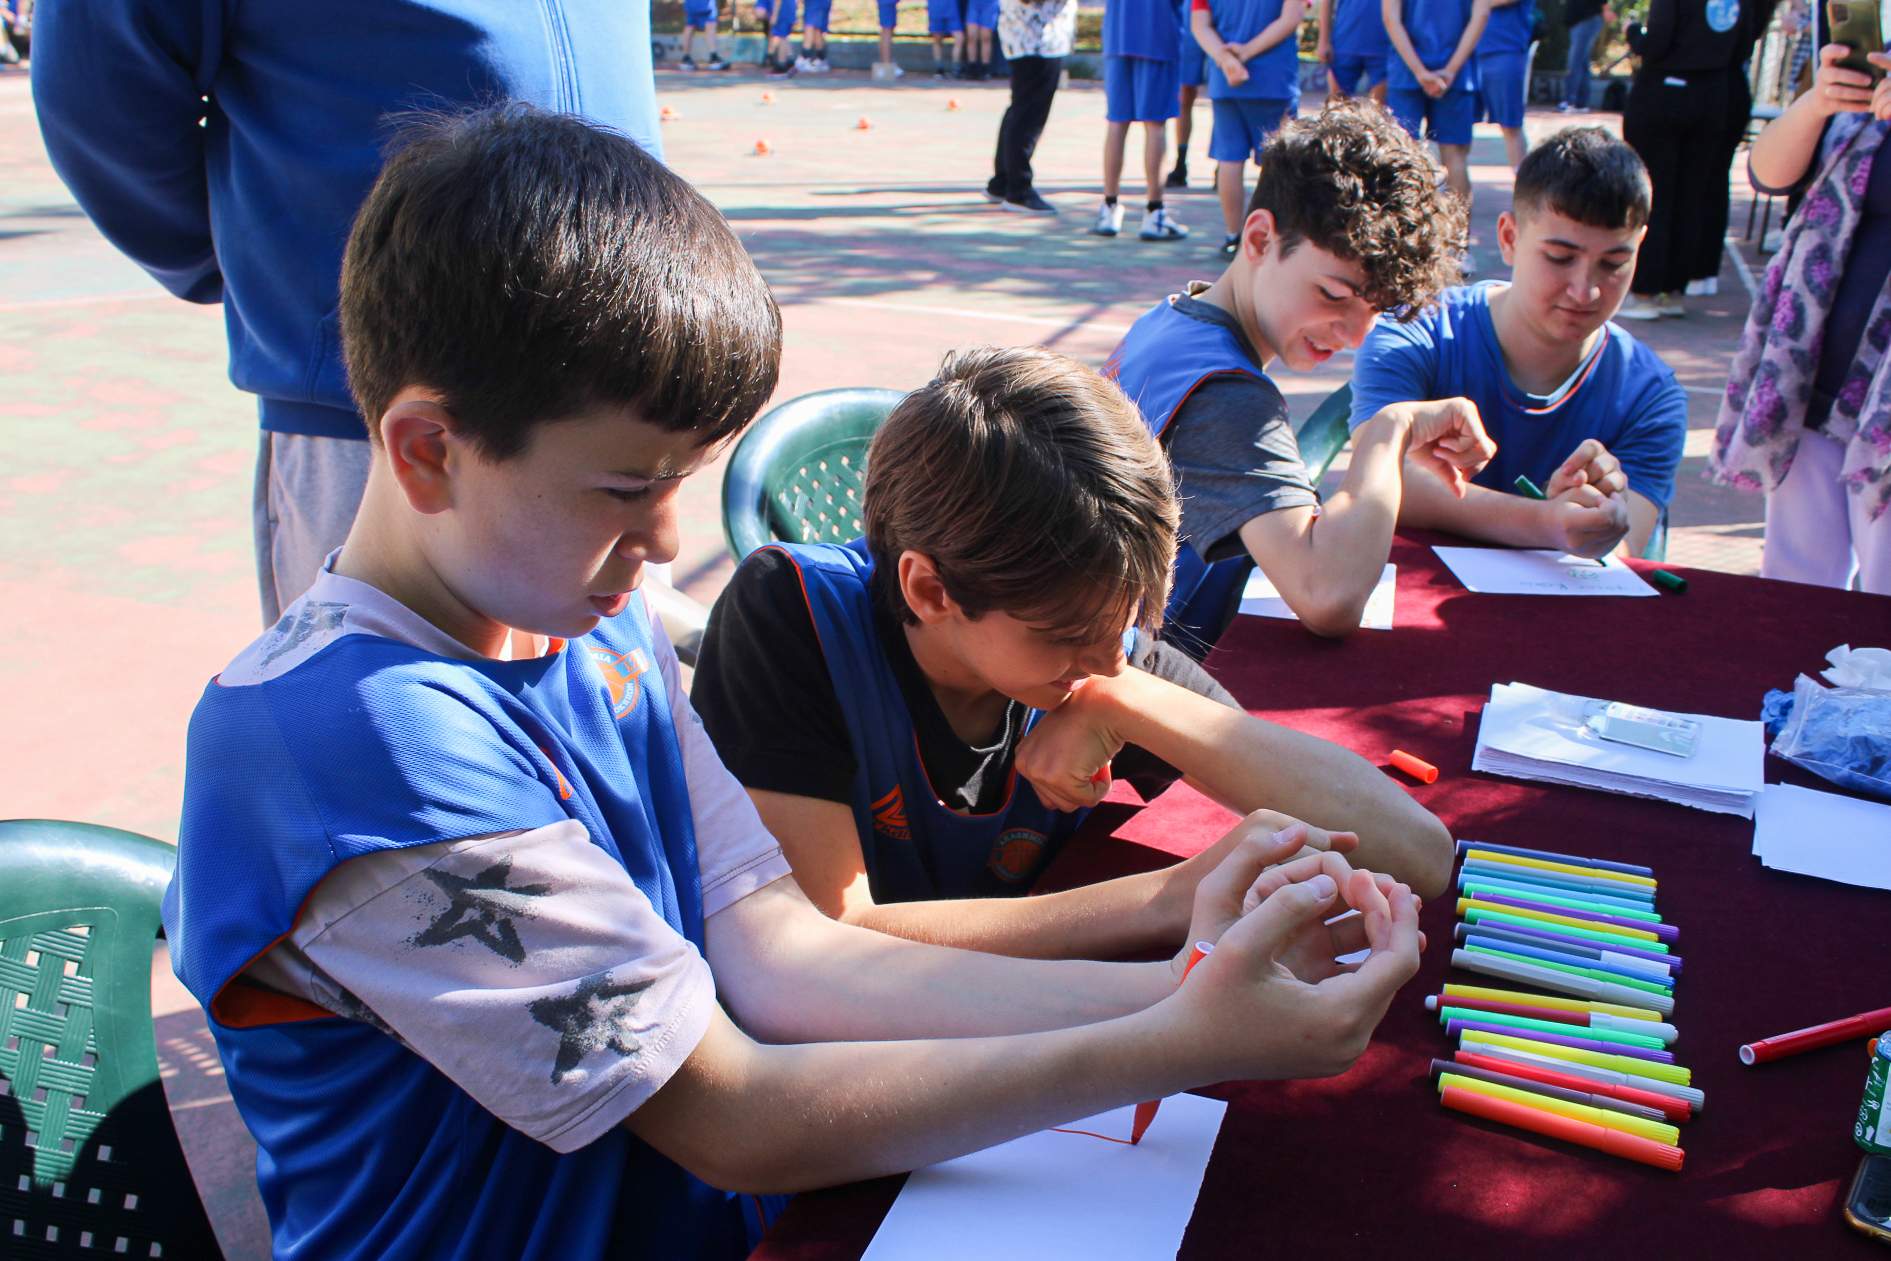 Drawing activity at table during the event